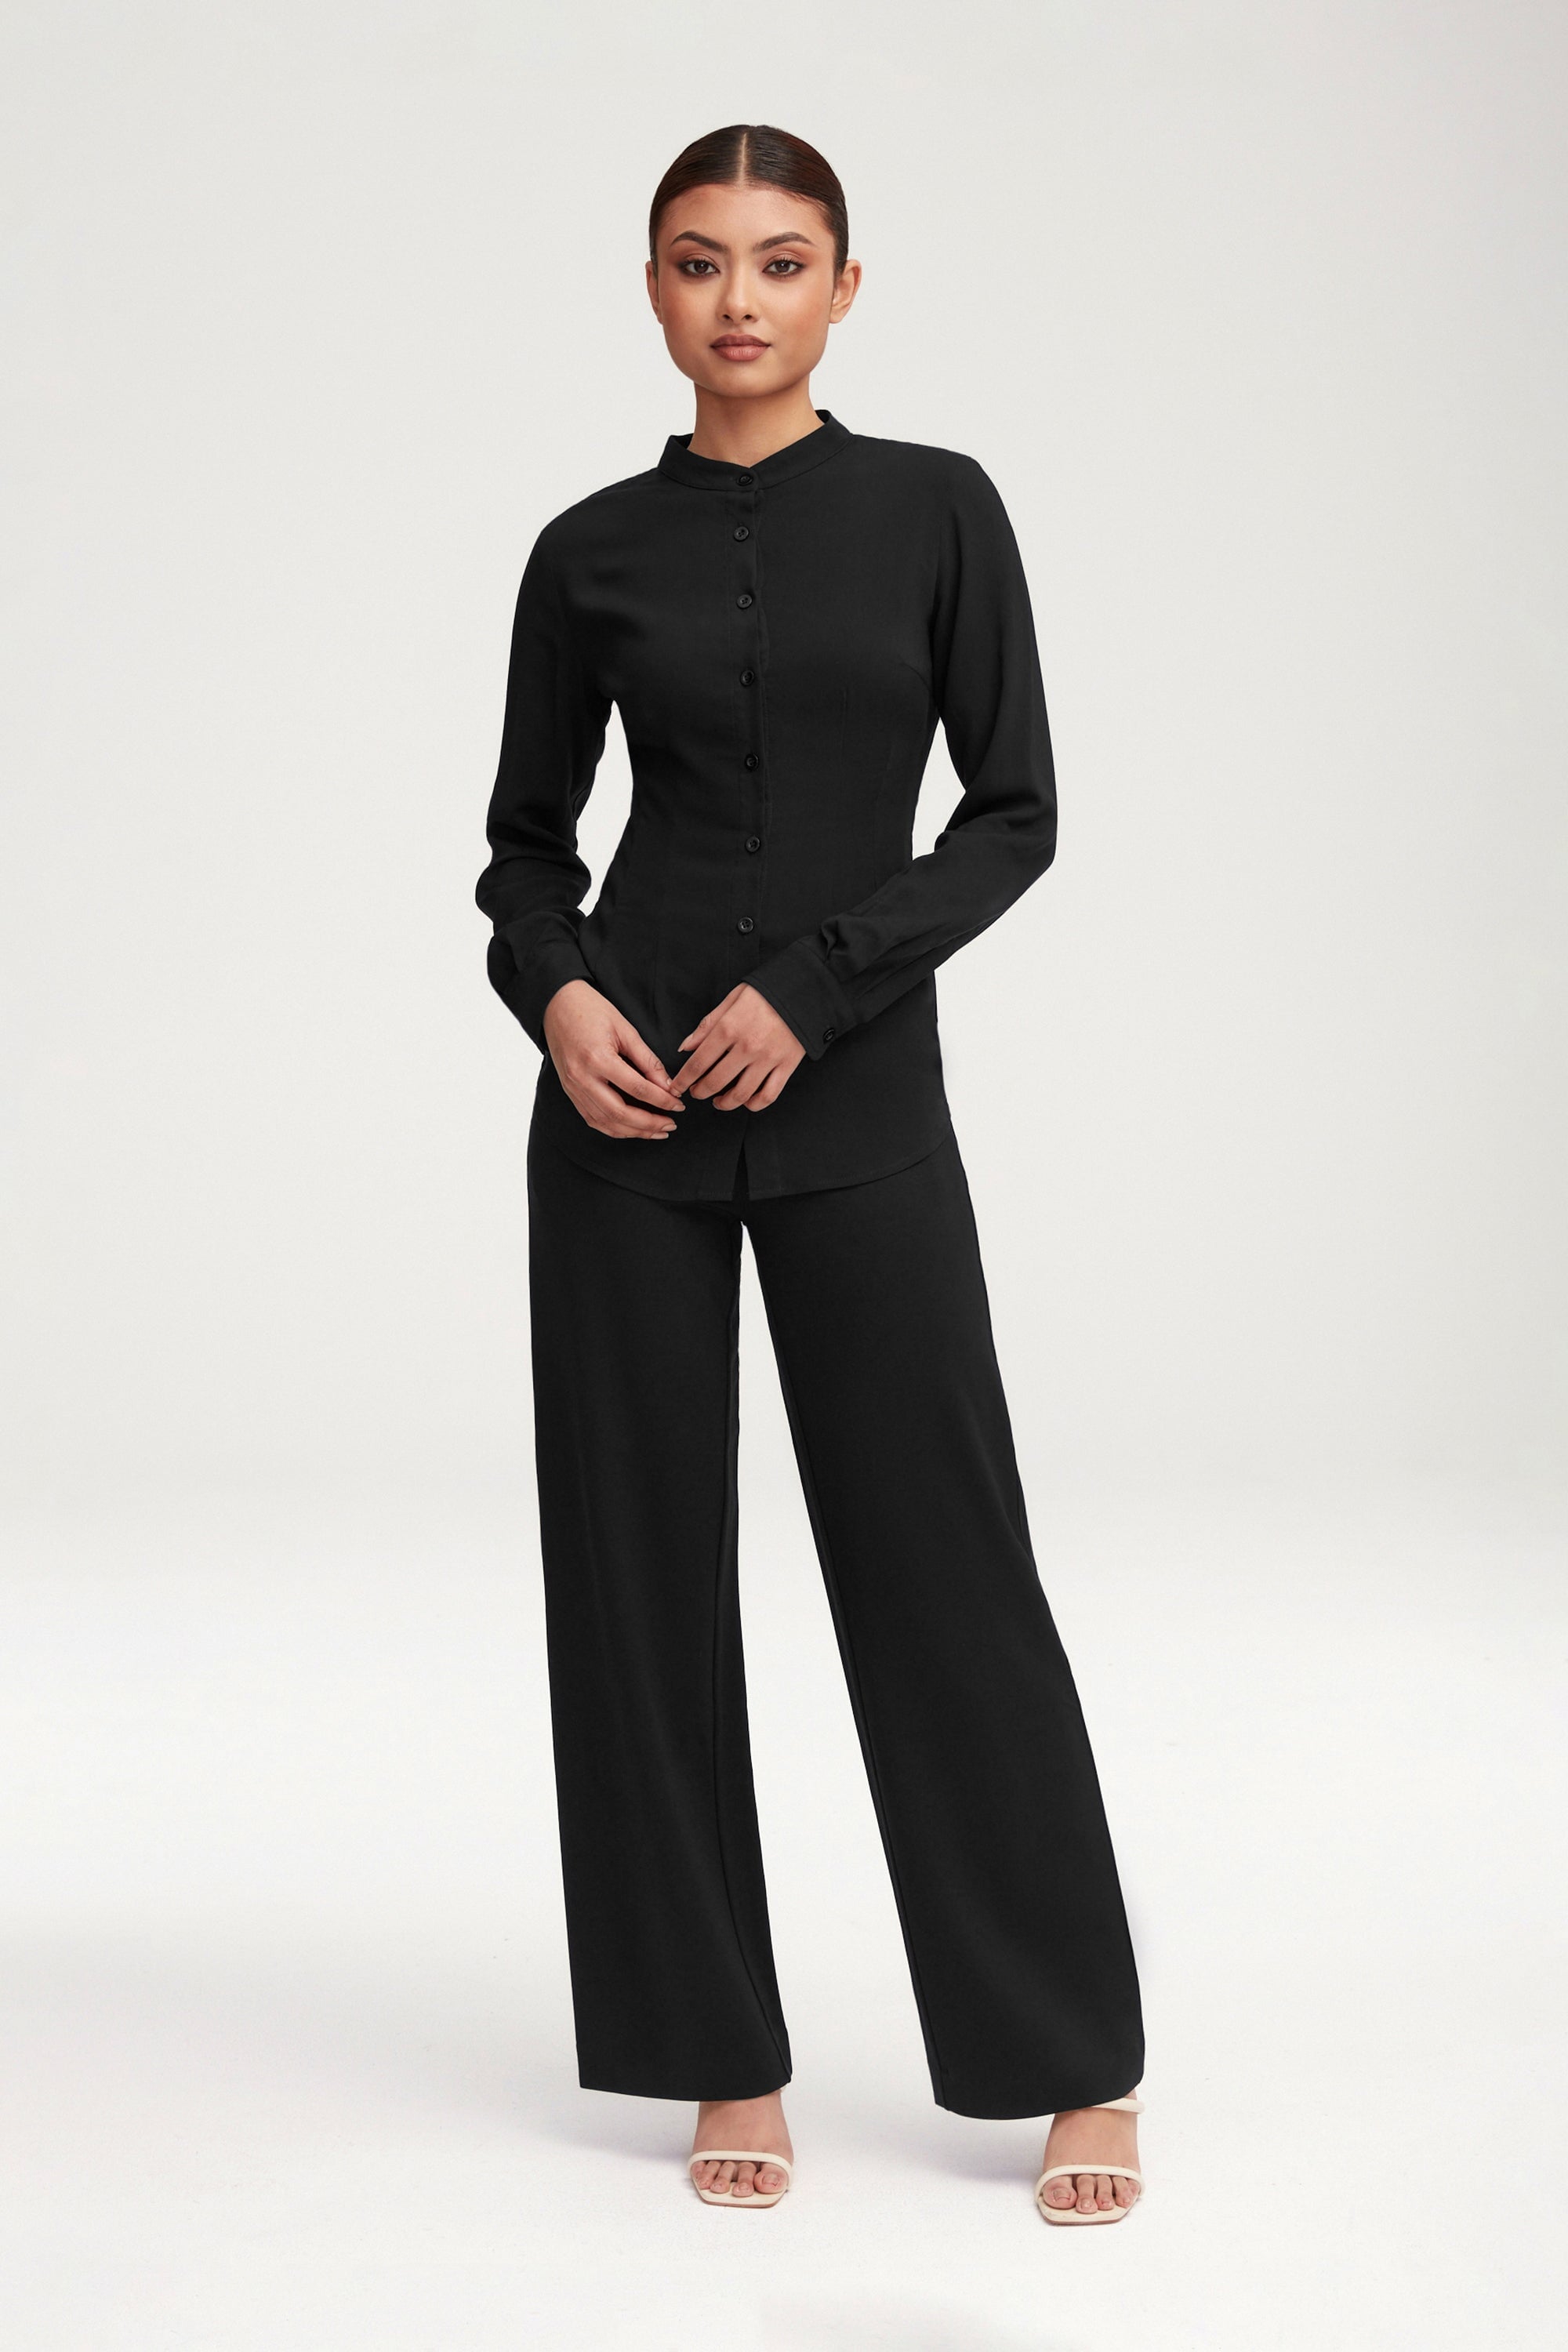 Essential Jersey Wide Leg Pants - Black Clothing Veiled 